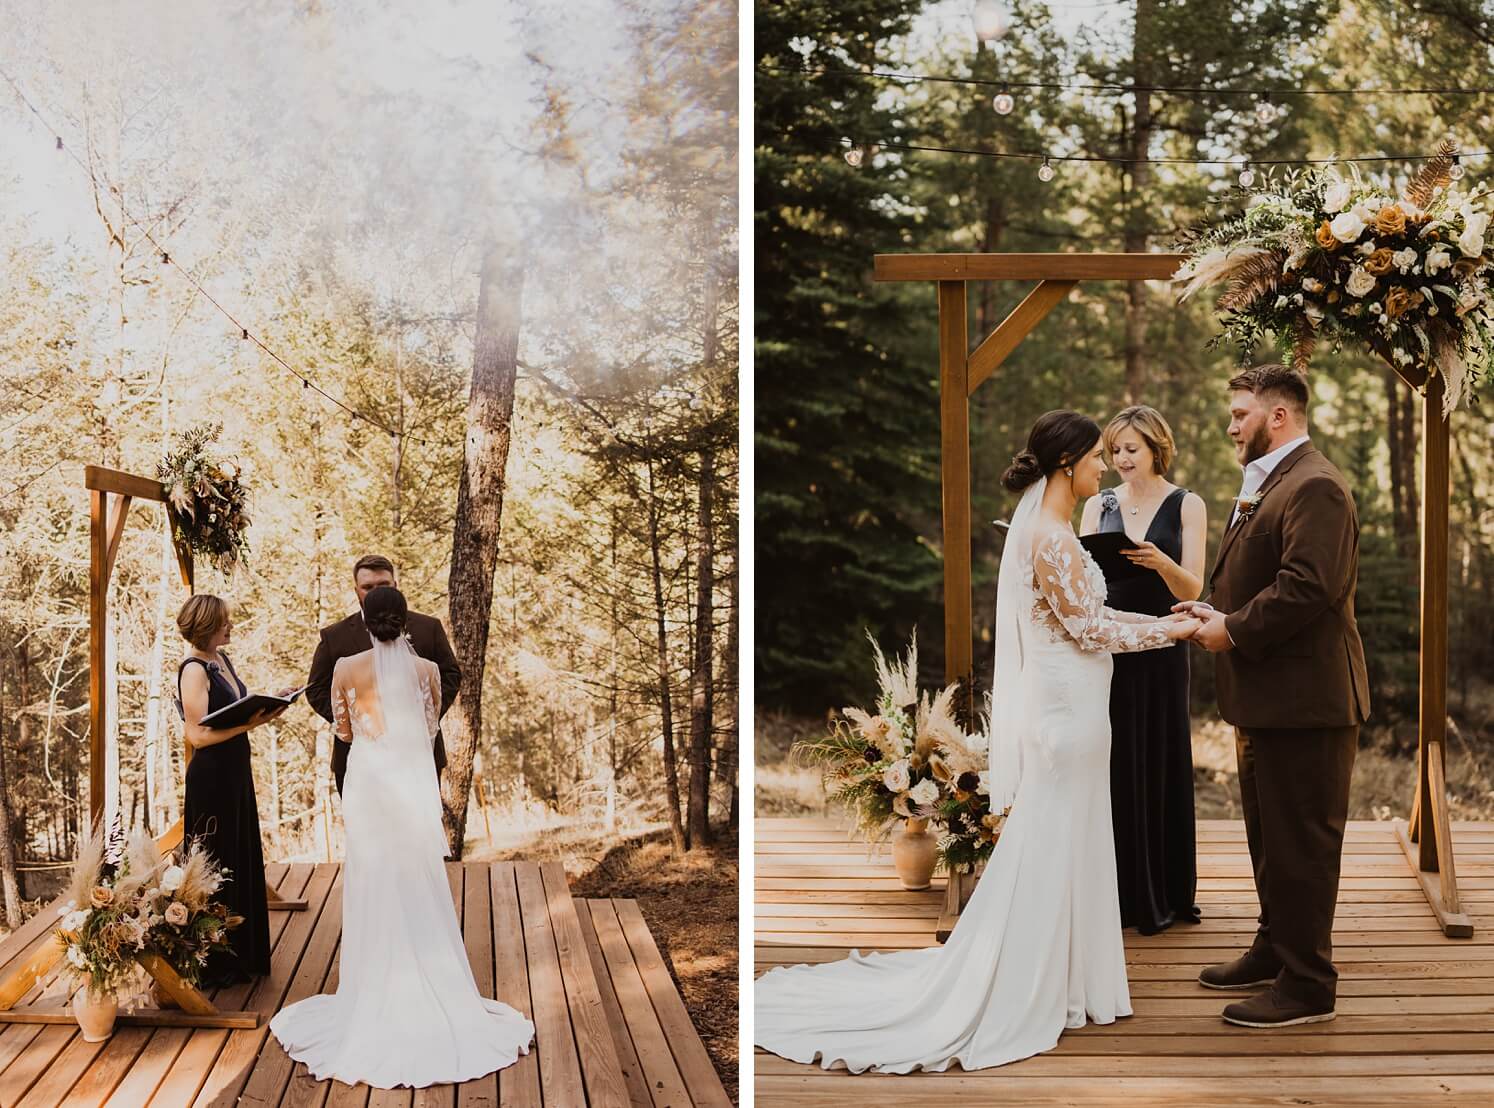 Bride and groom standing at altar with officiant | bride and groom holding hands at Evergreen wedding venue | McArthur Weddings and Events